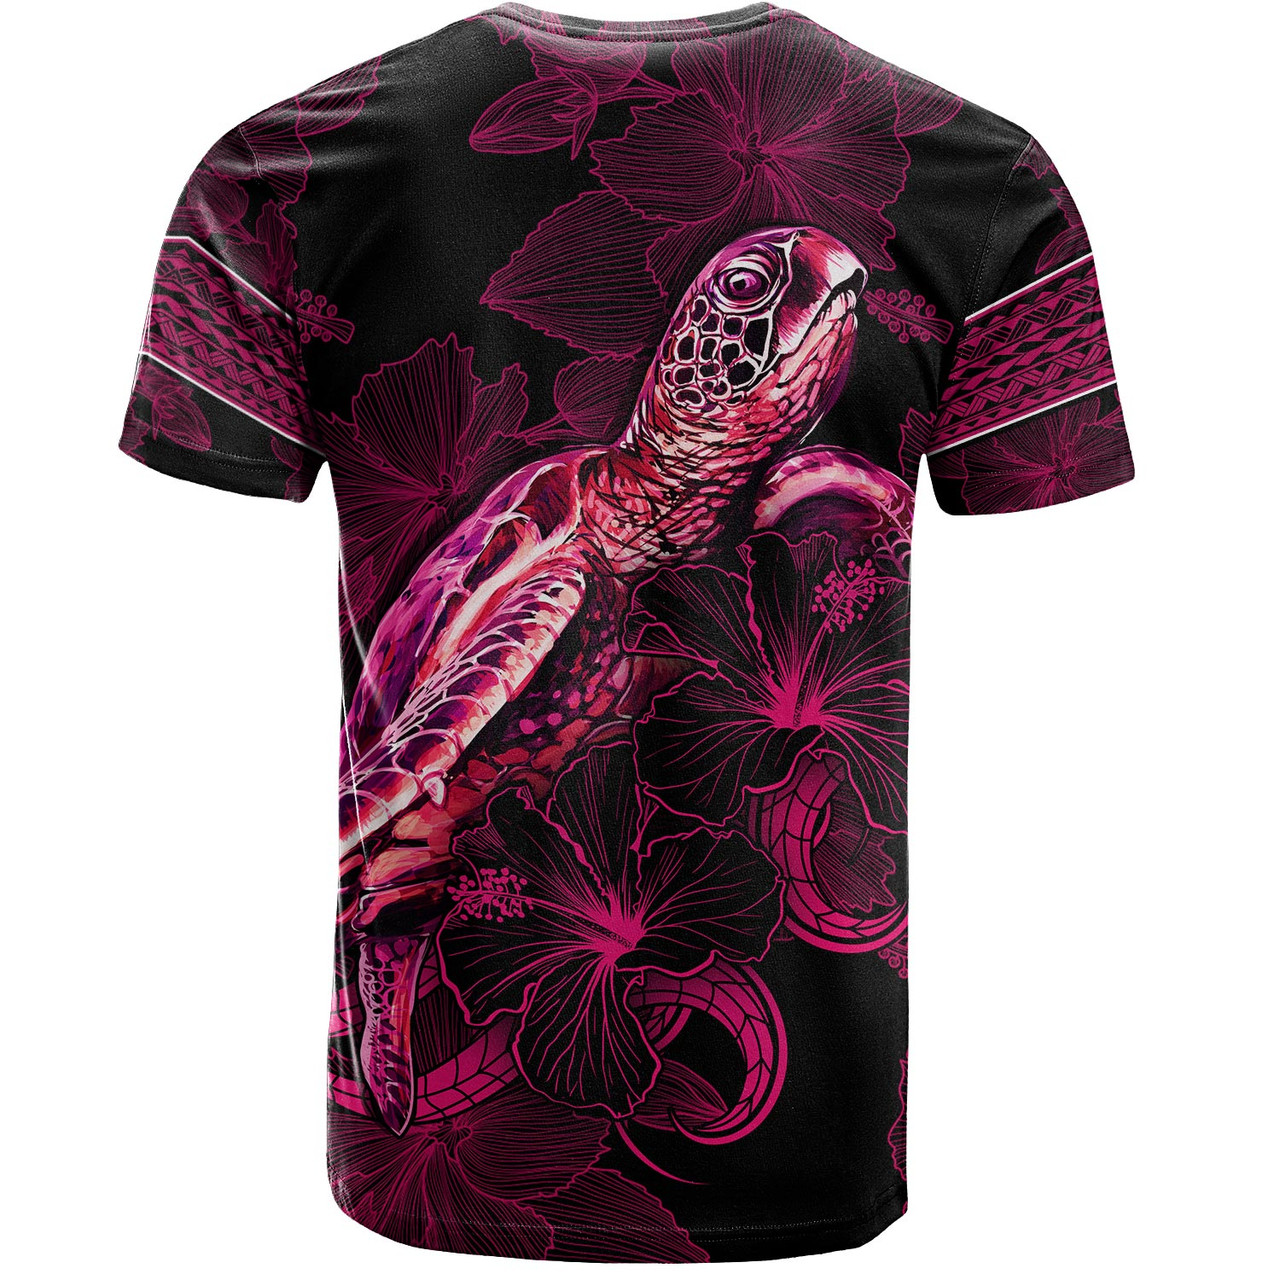 Marshall Islands T-Shirt Sea Turtle With Blooming Hibiscus Flowers Tribal Maroon